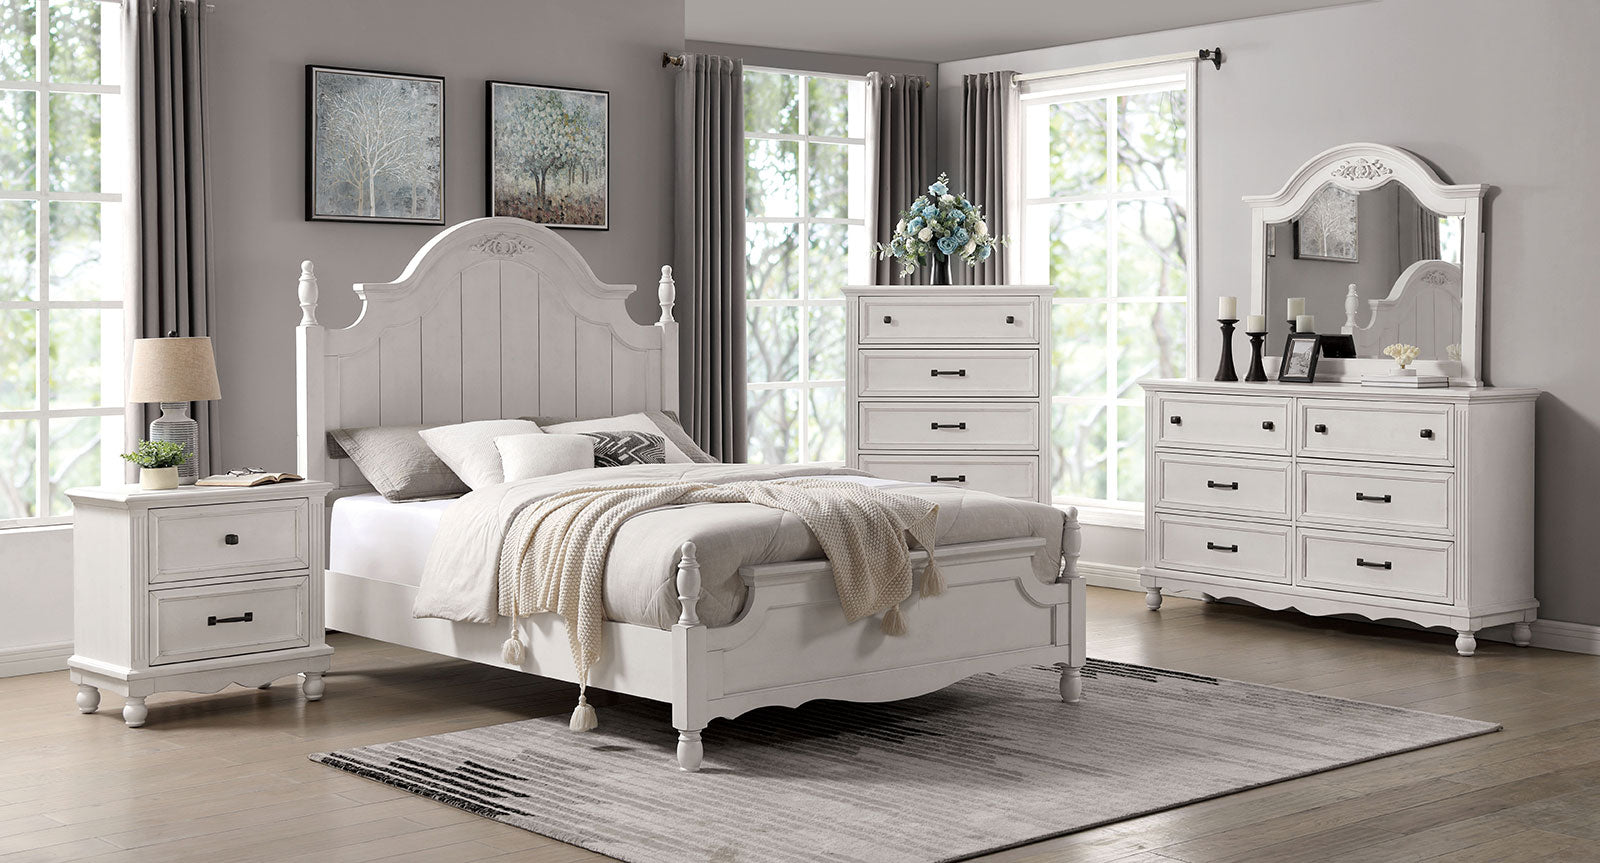 GEORGETTE E.King Bed image